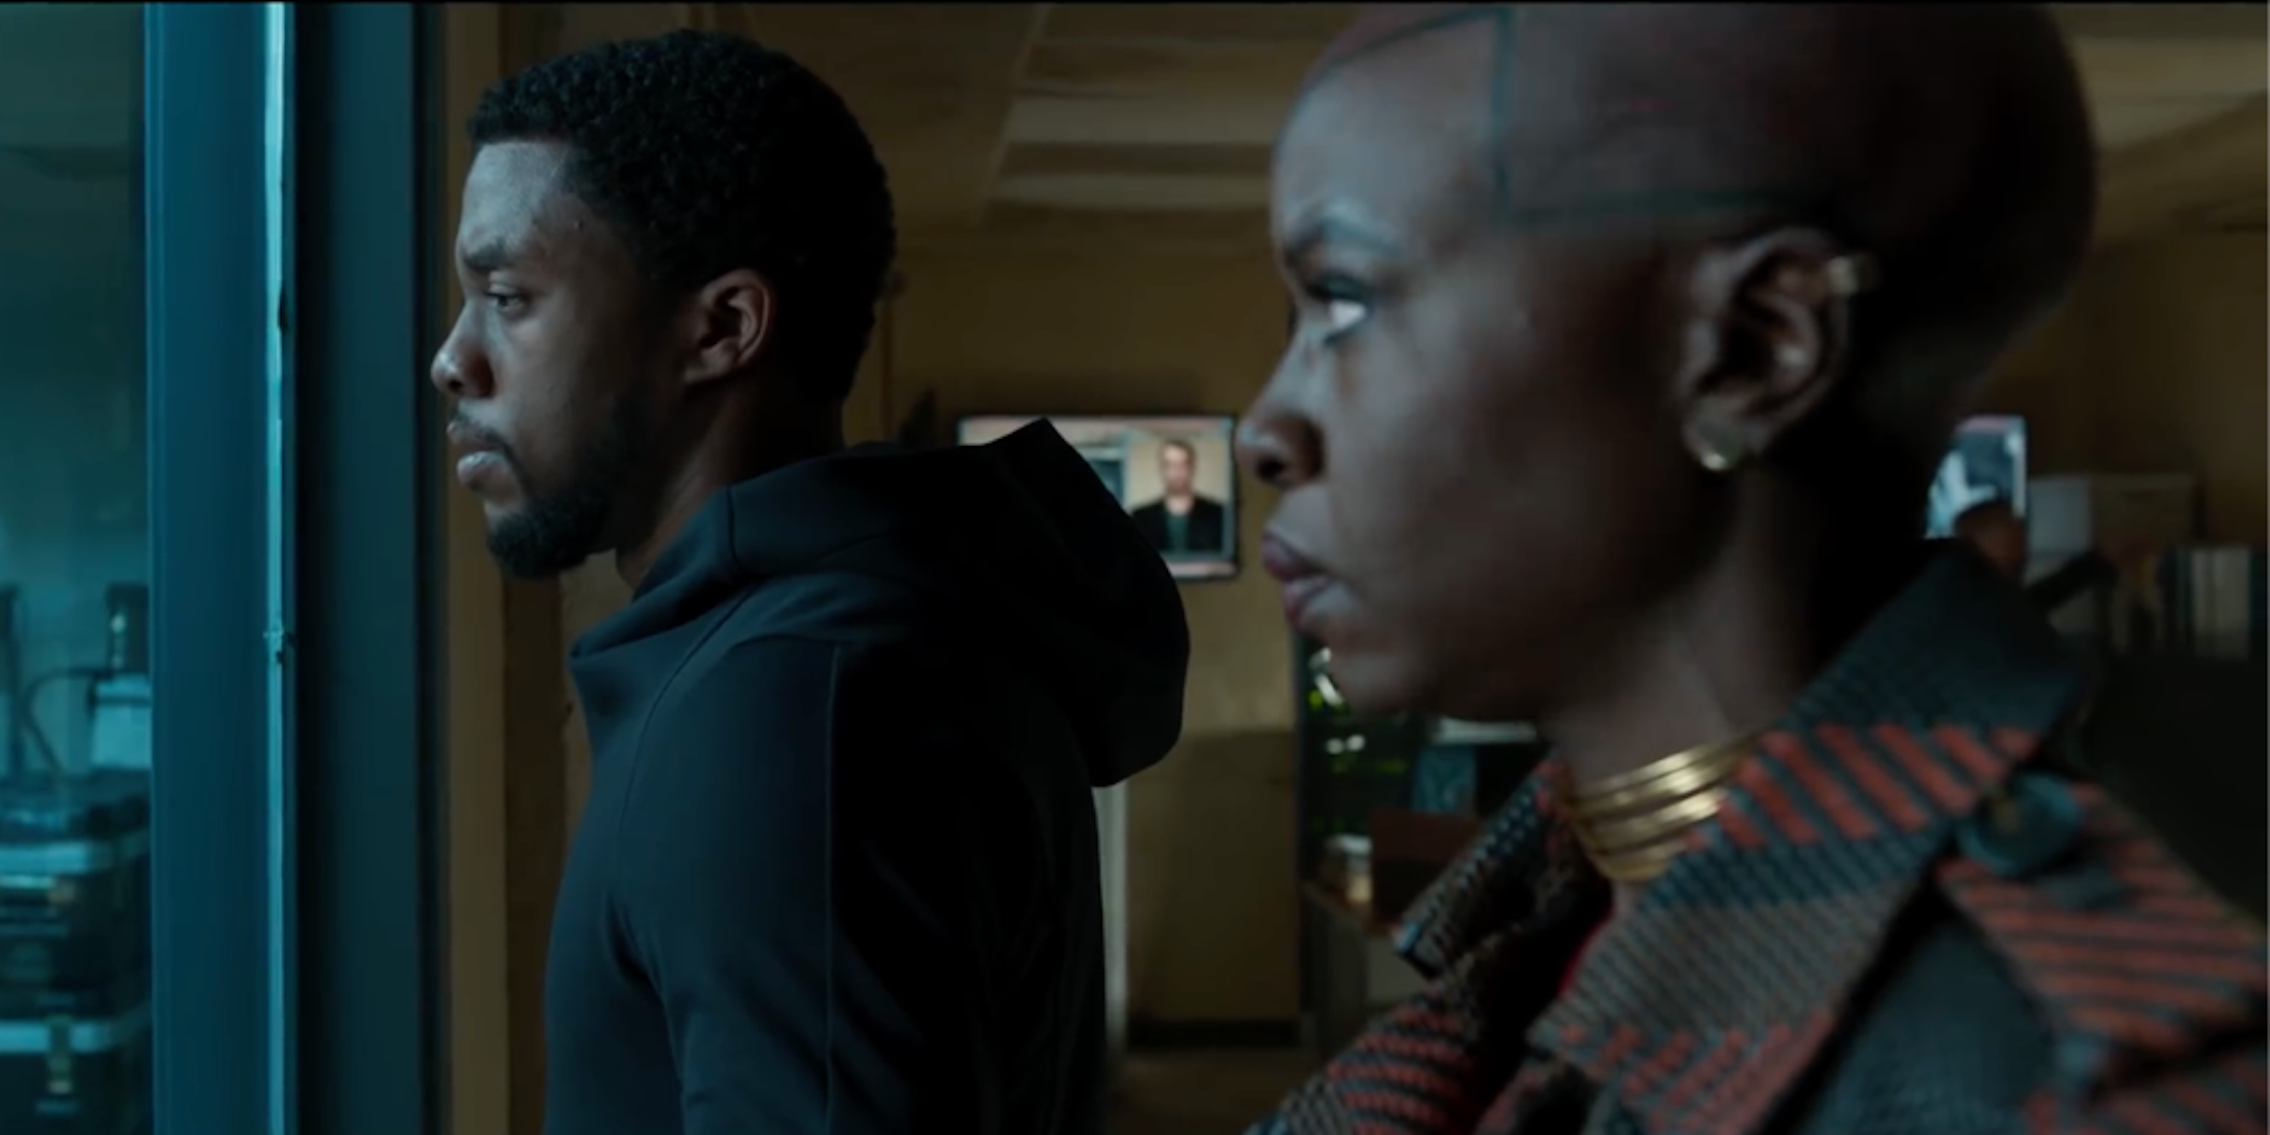 People are faking attacks at 'Black Panther' screenings.